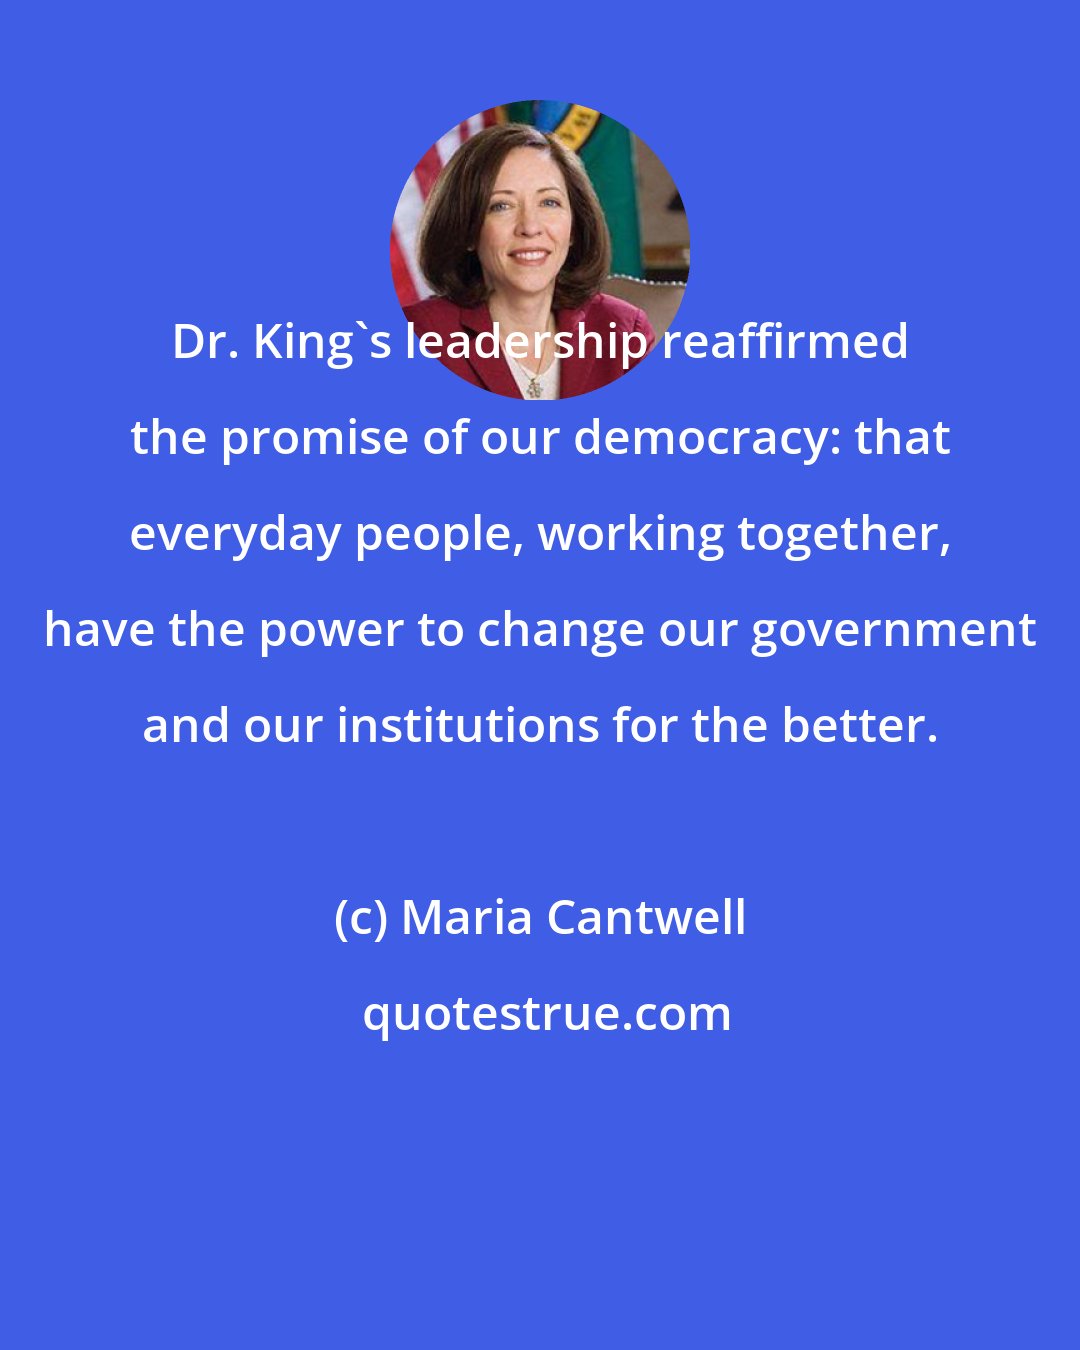 Maria Cantwell: Dr. King's leadership reaffirmed the promise of our democracy: that everyday people, working together, have the power to change our government and our institutions for the better.